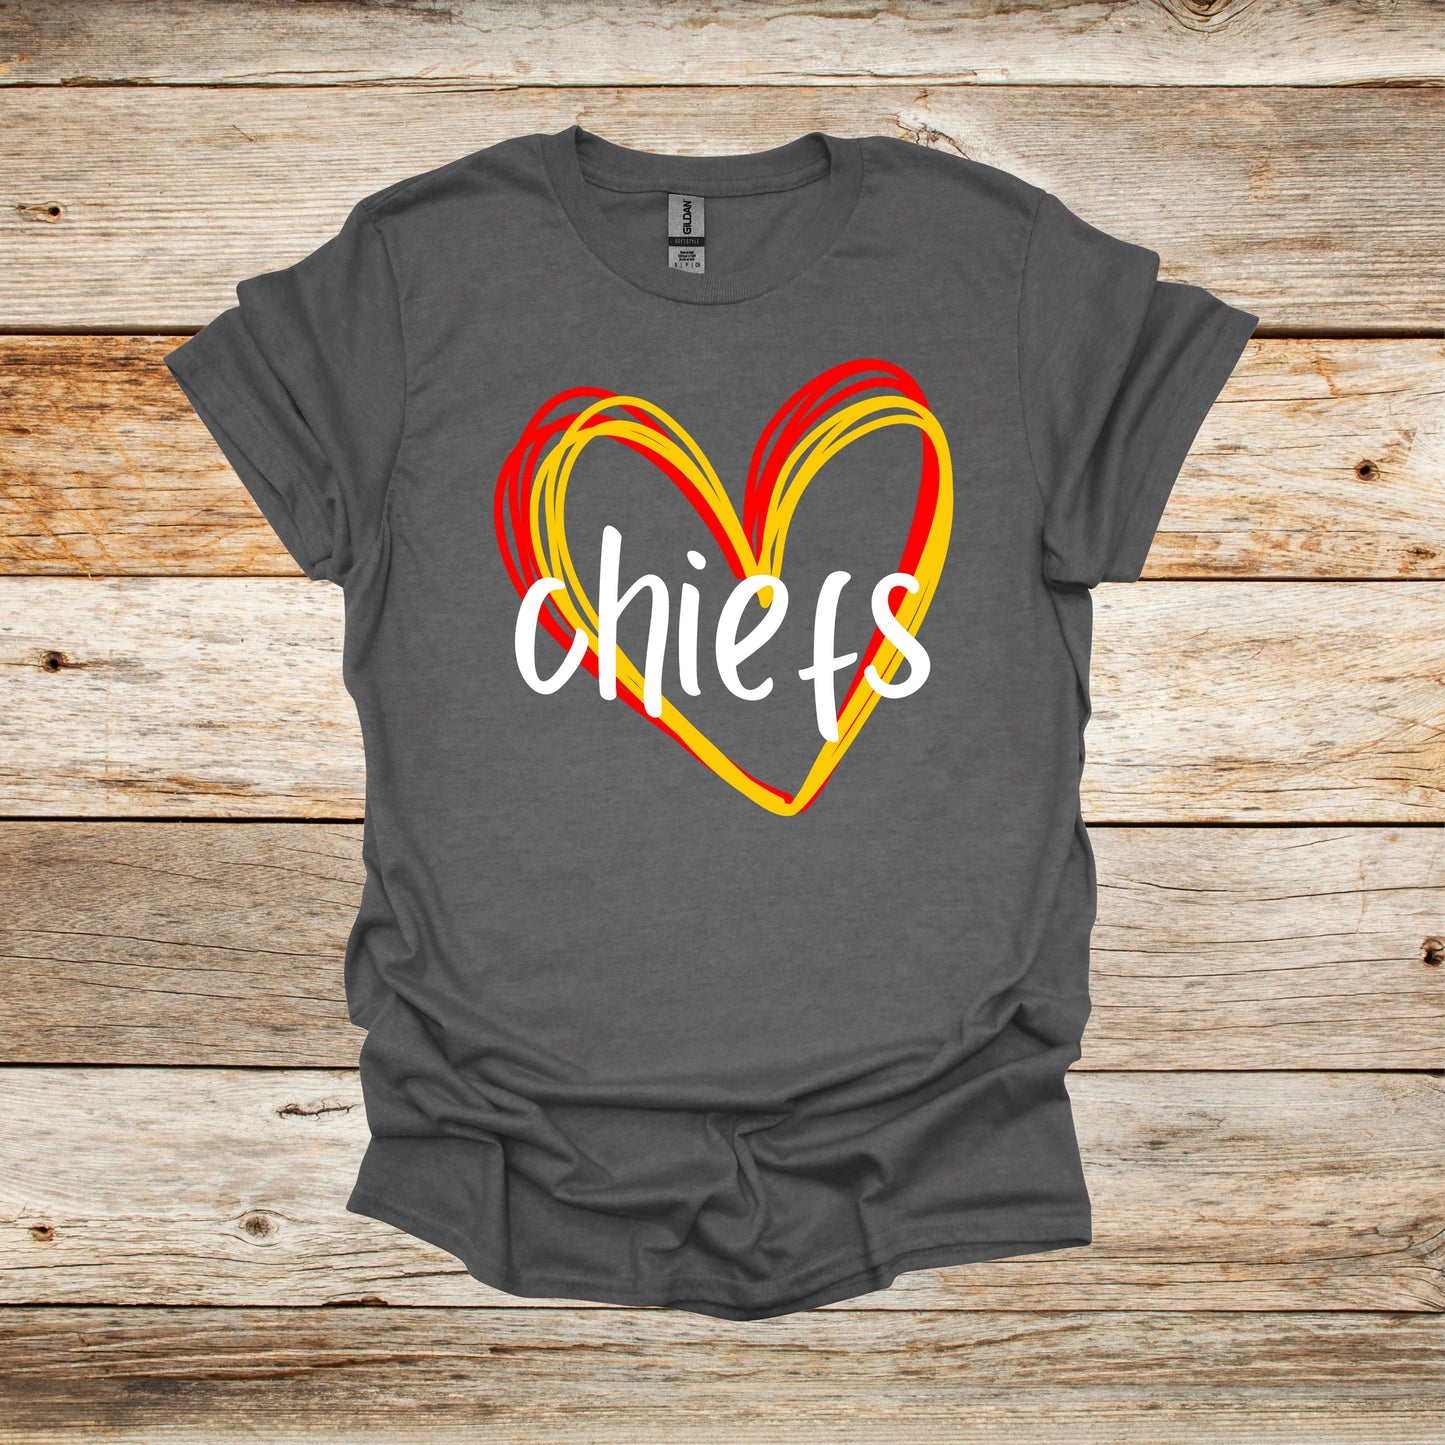 Football T-Shirt - Kansas City Chiefs - Adult and Children's Tee Shirts - Sports T-Shirts Graphic Avenue Graphite Heather Adult Small 